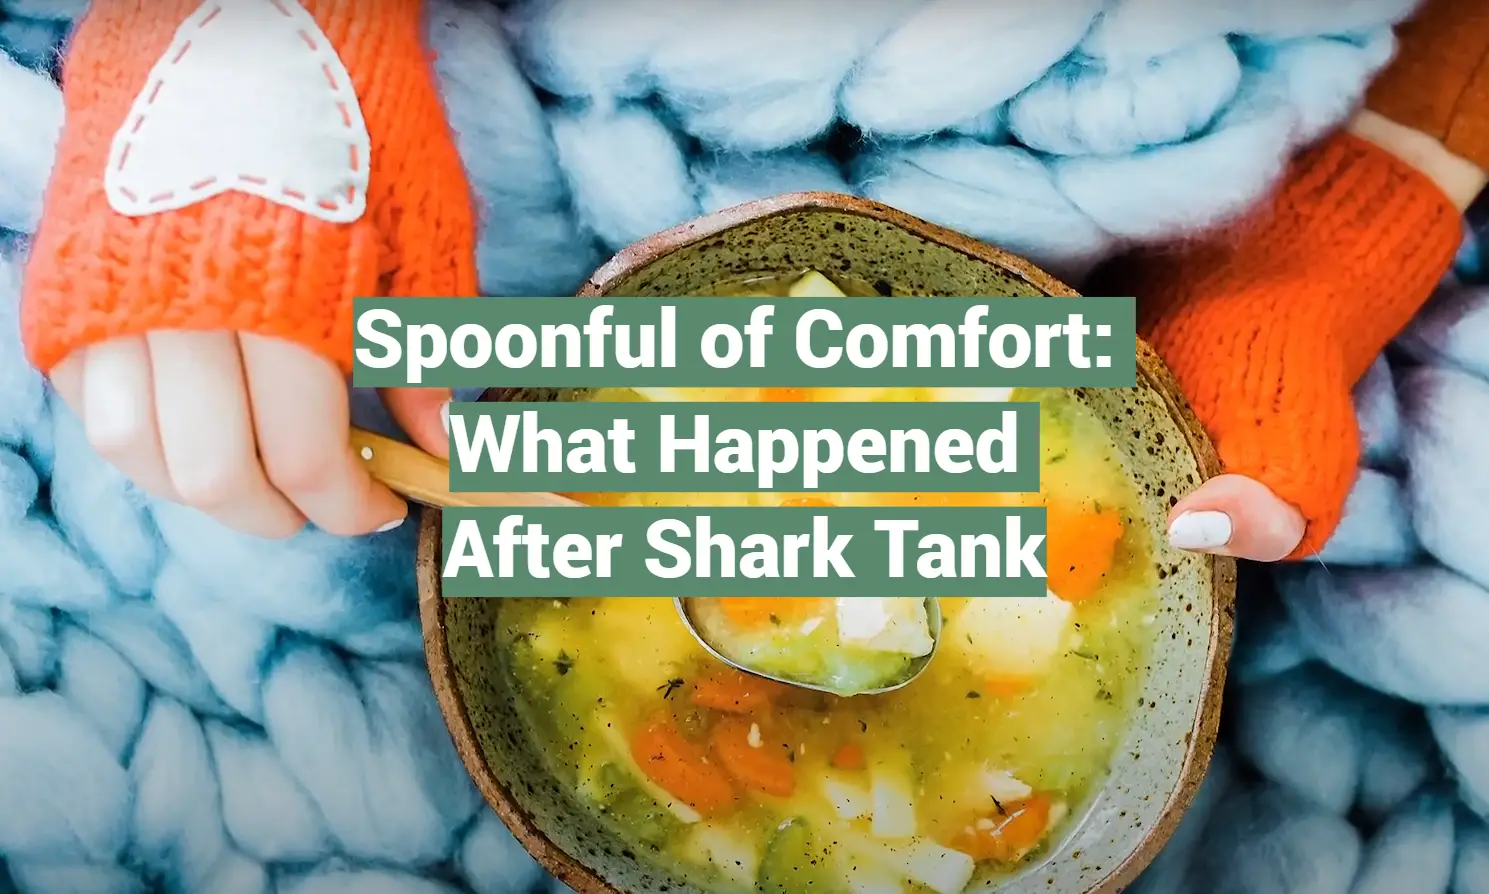 Spoonful of Comfort: What Happened After Shark Tank